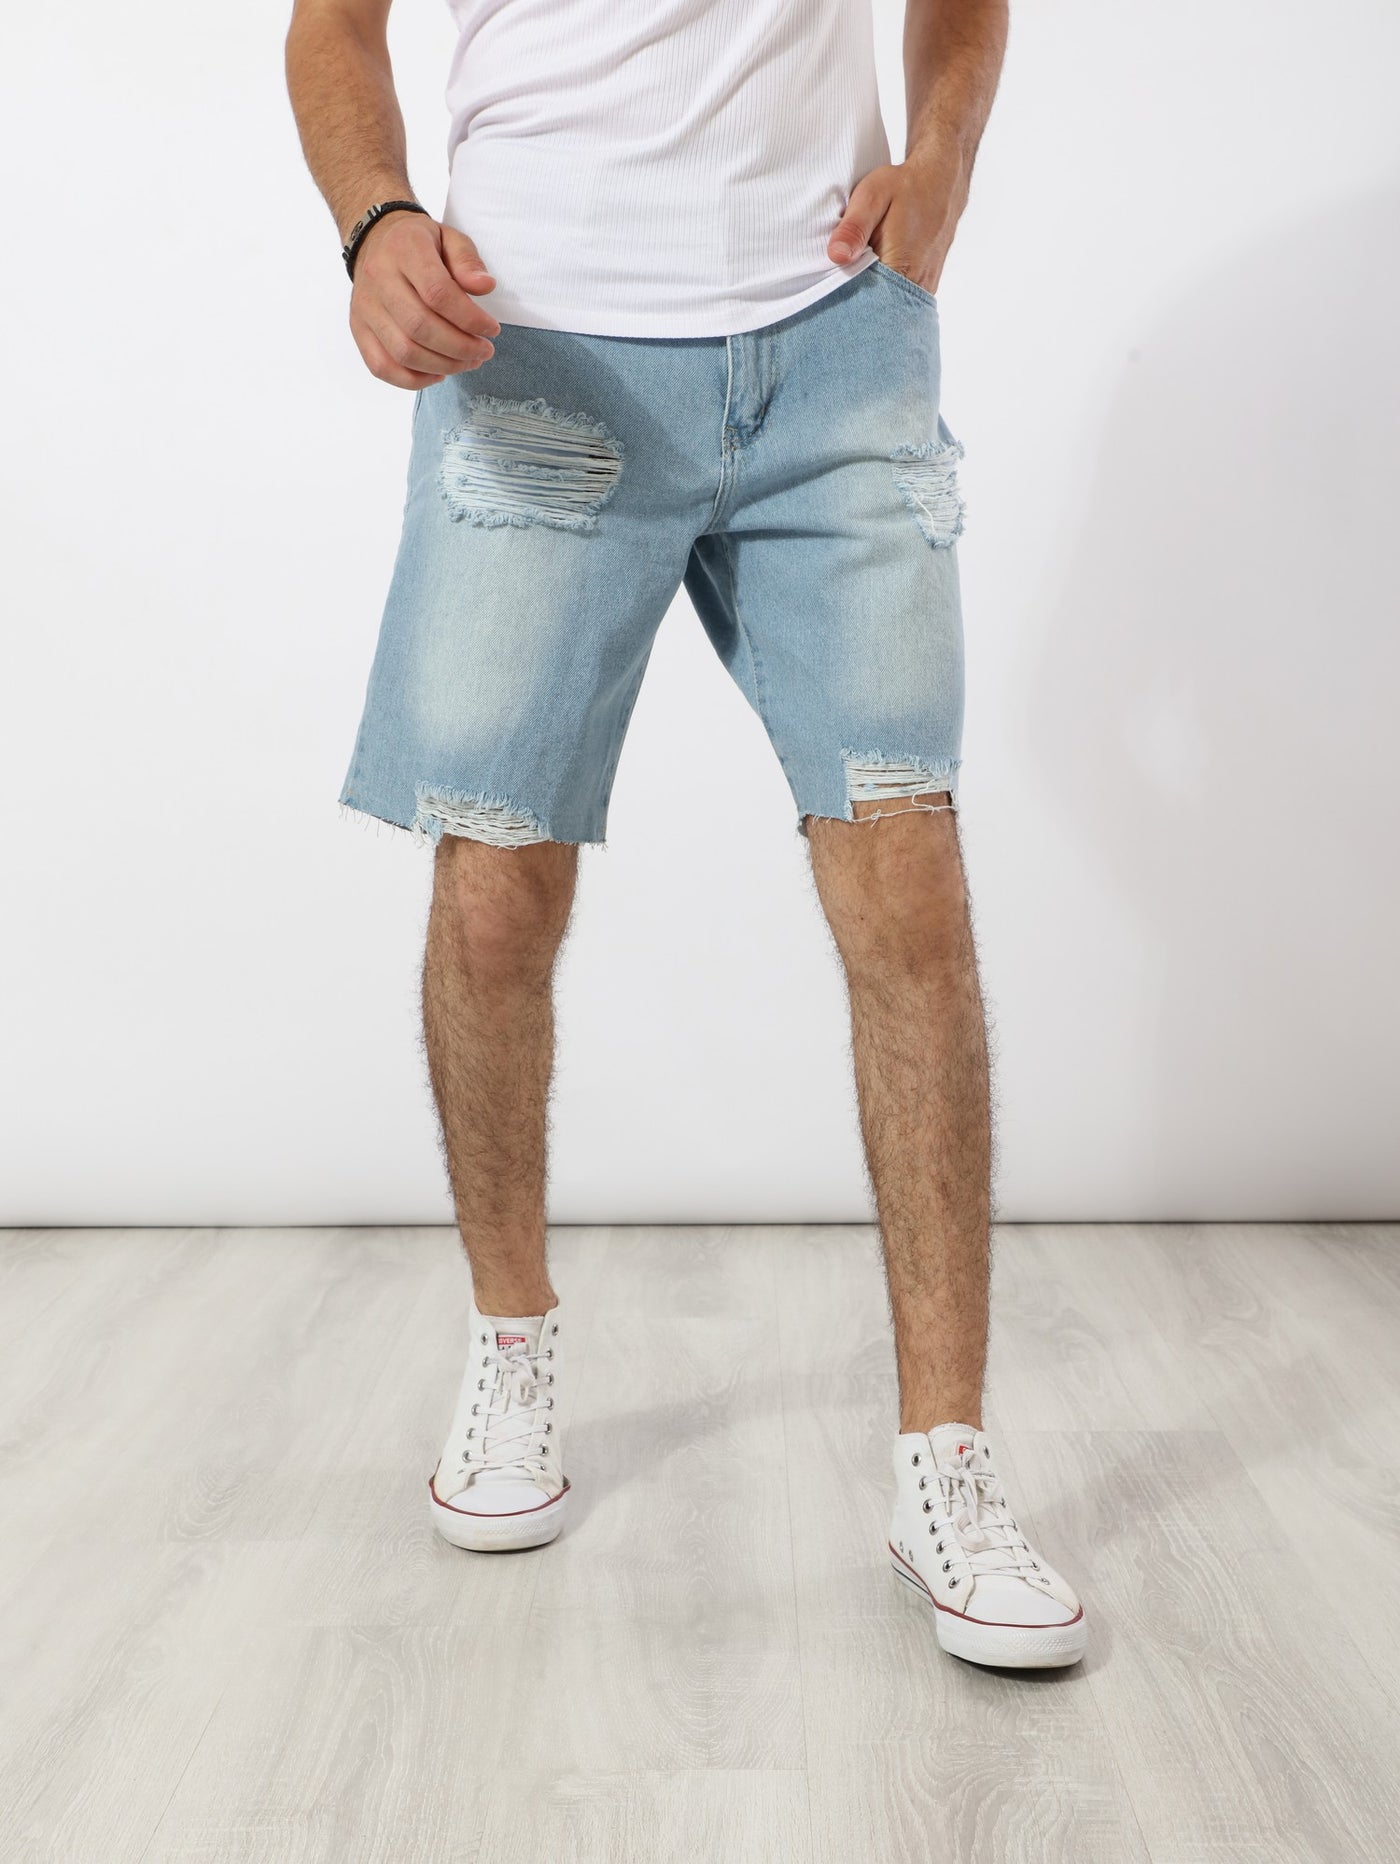 Shorts - Fashionable - Cut Out